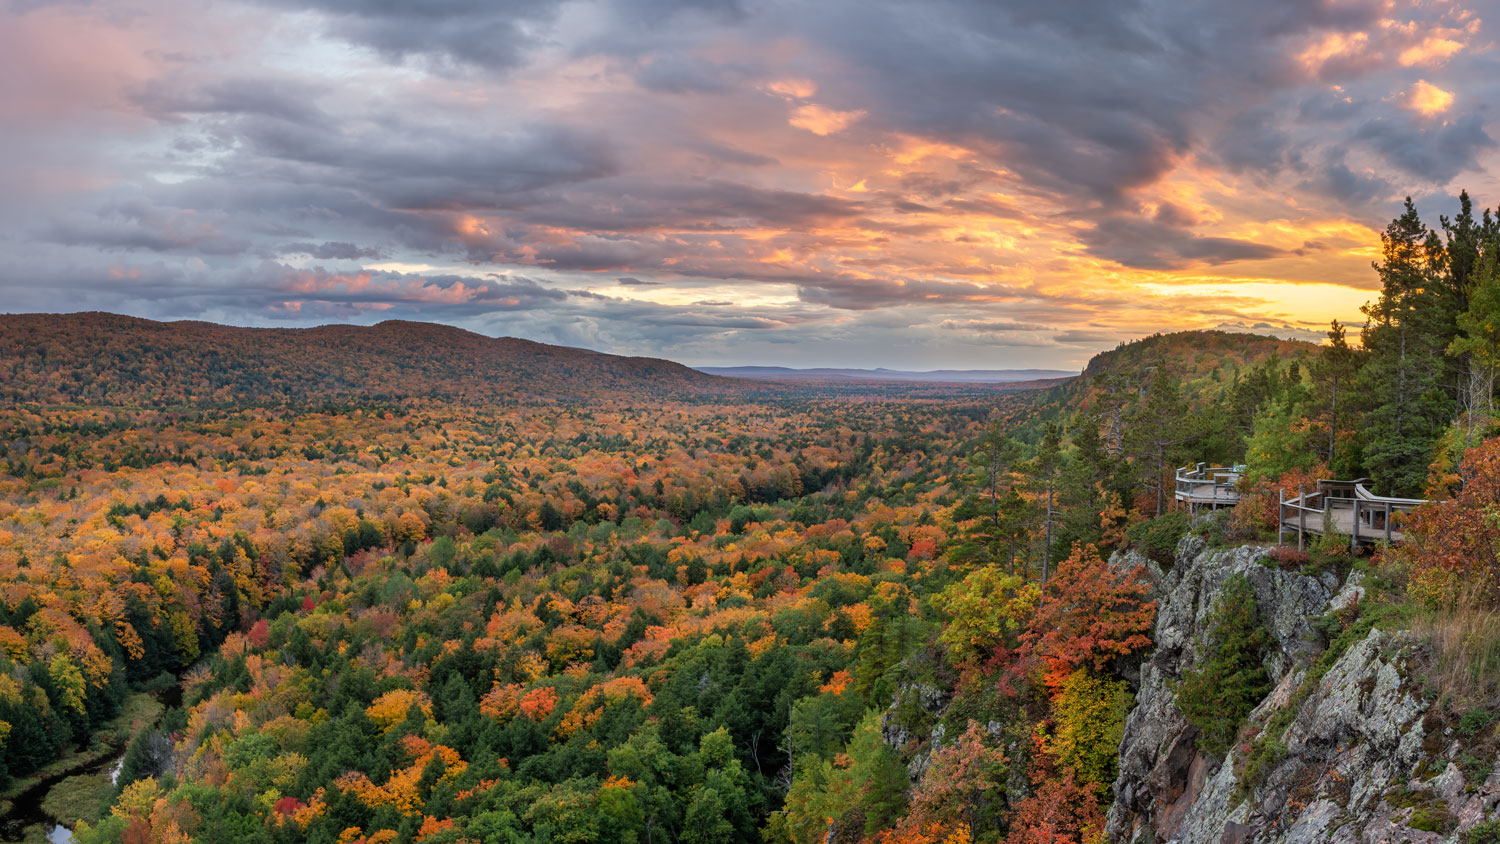 Porcupine Mountains in Michigan